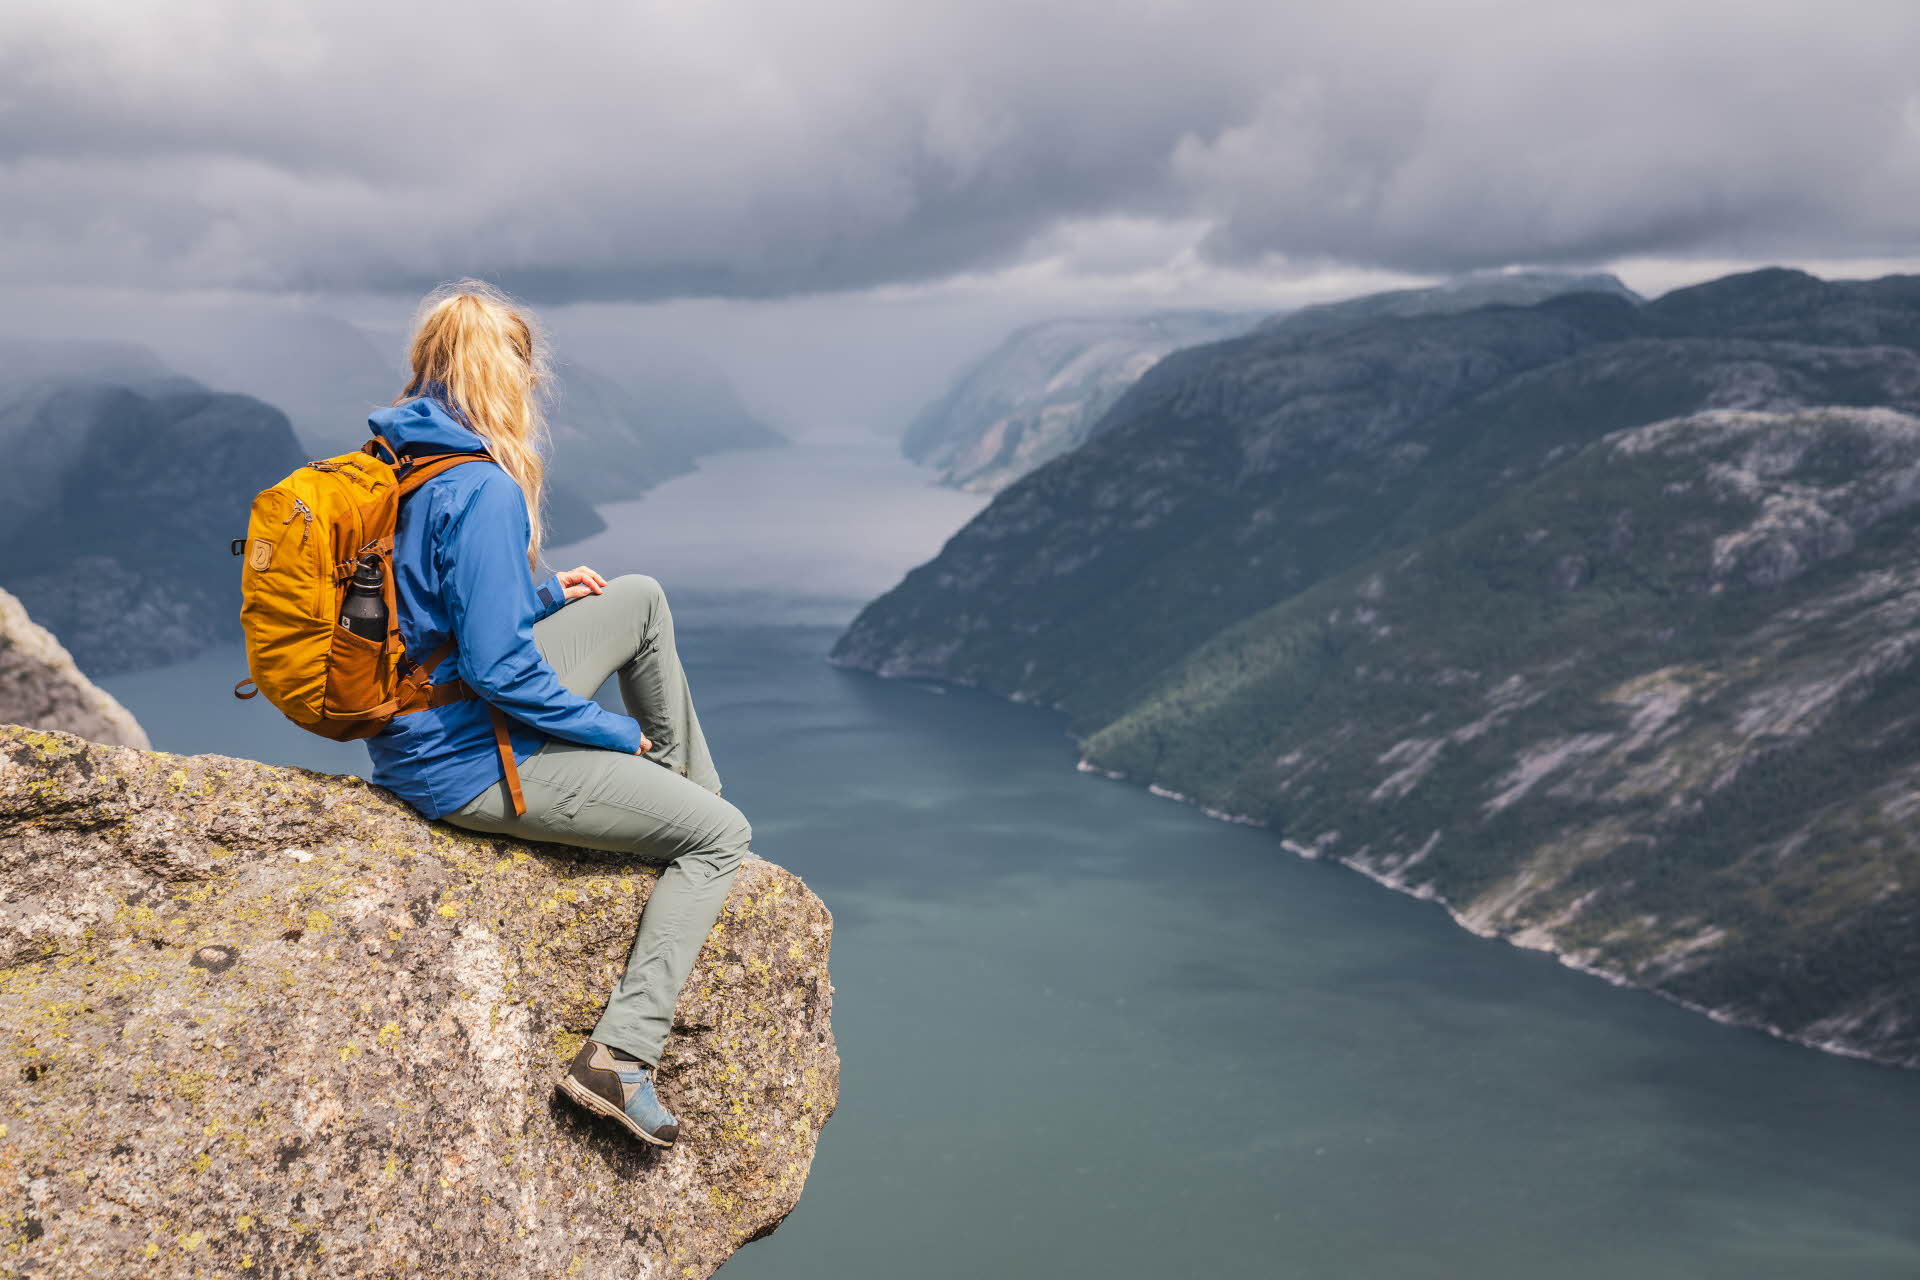 A woman sitting on a rock high above the Lysefjord, looking out at the misty mountains